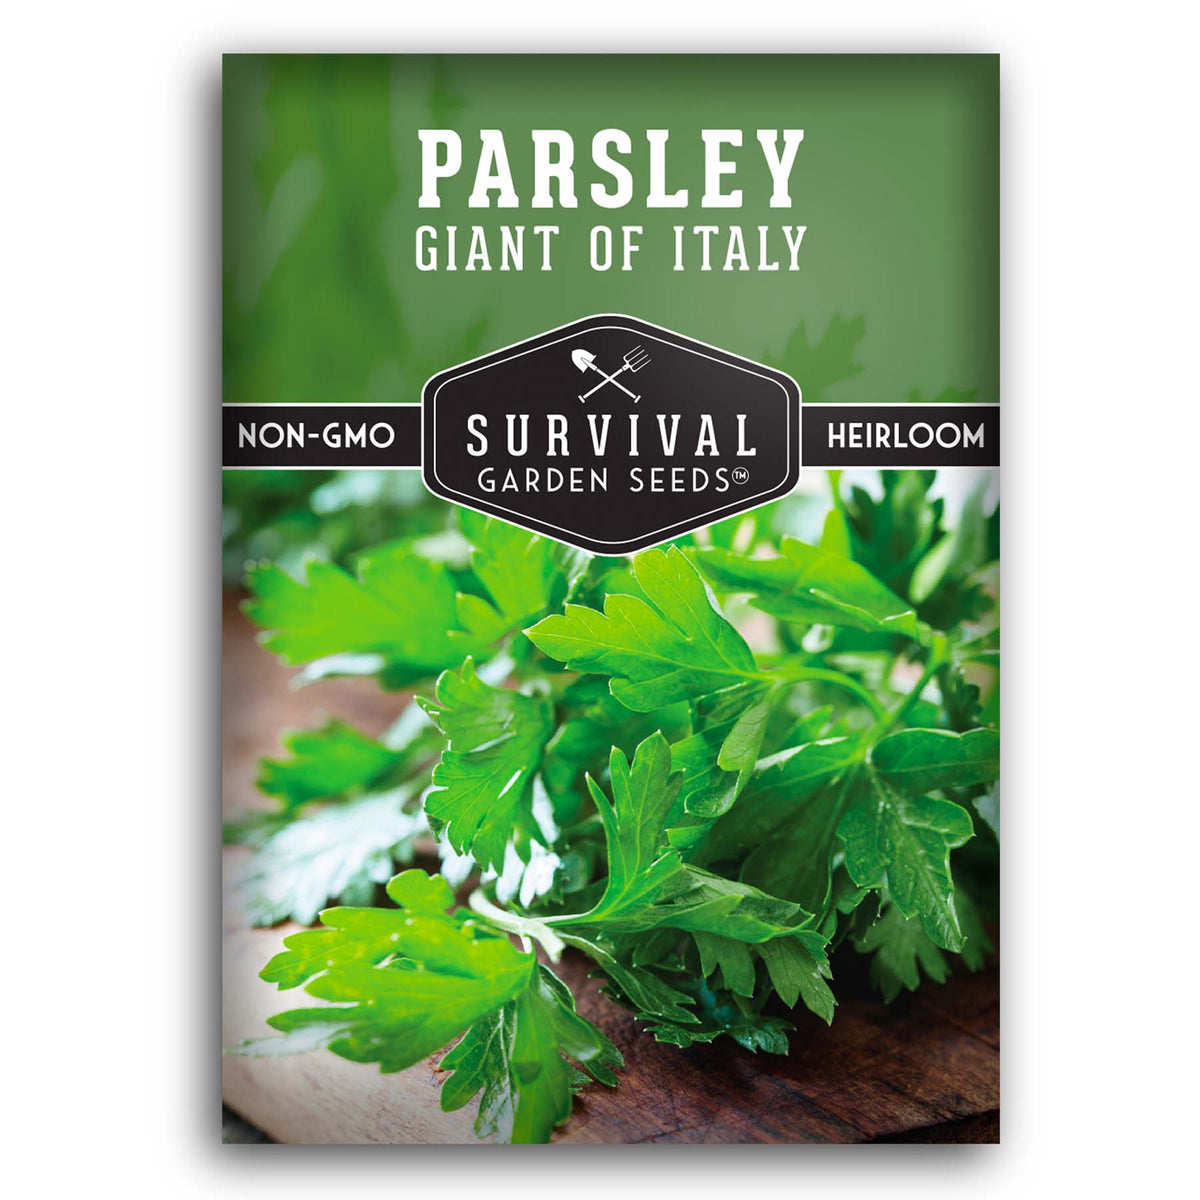 Italian Giant Parsley seeds for planting